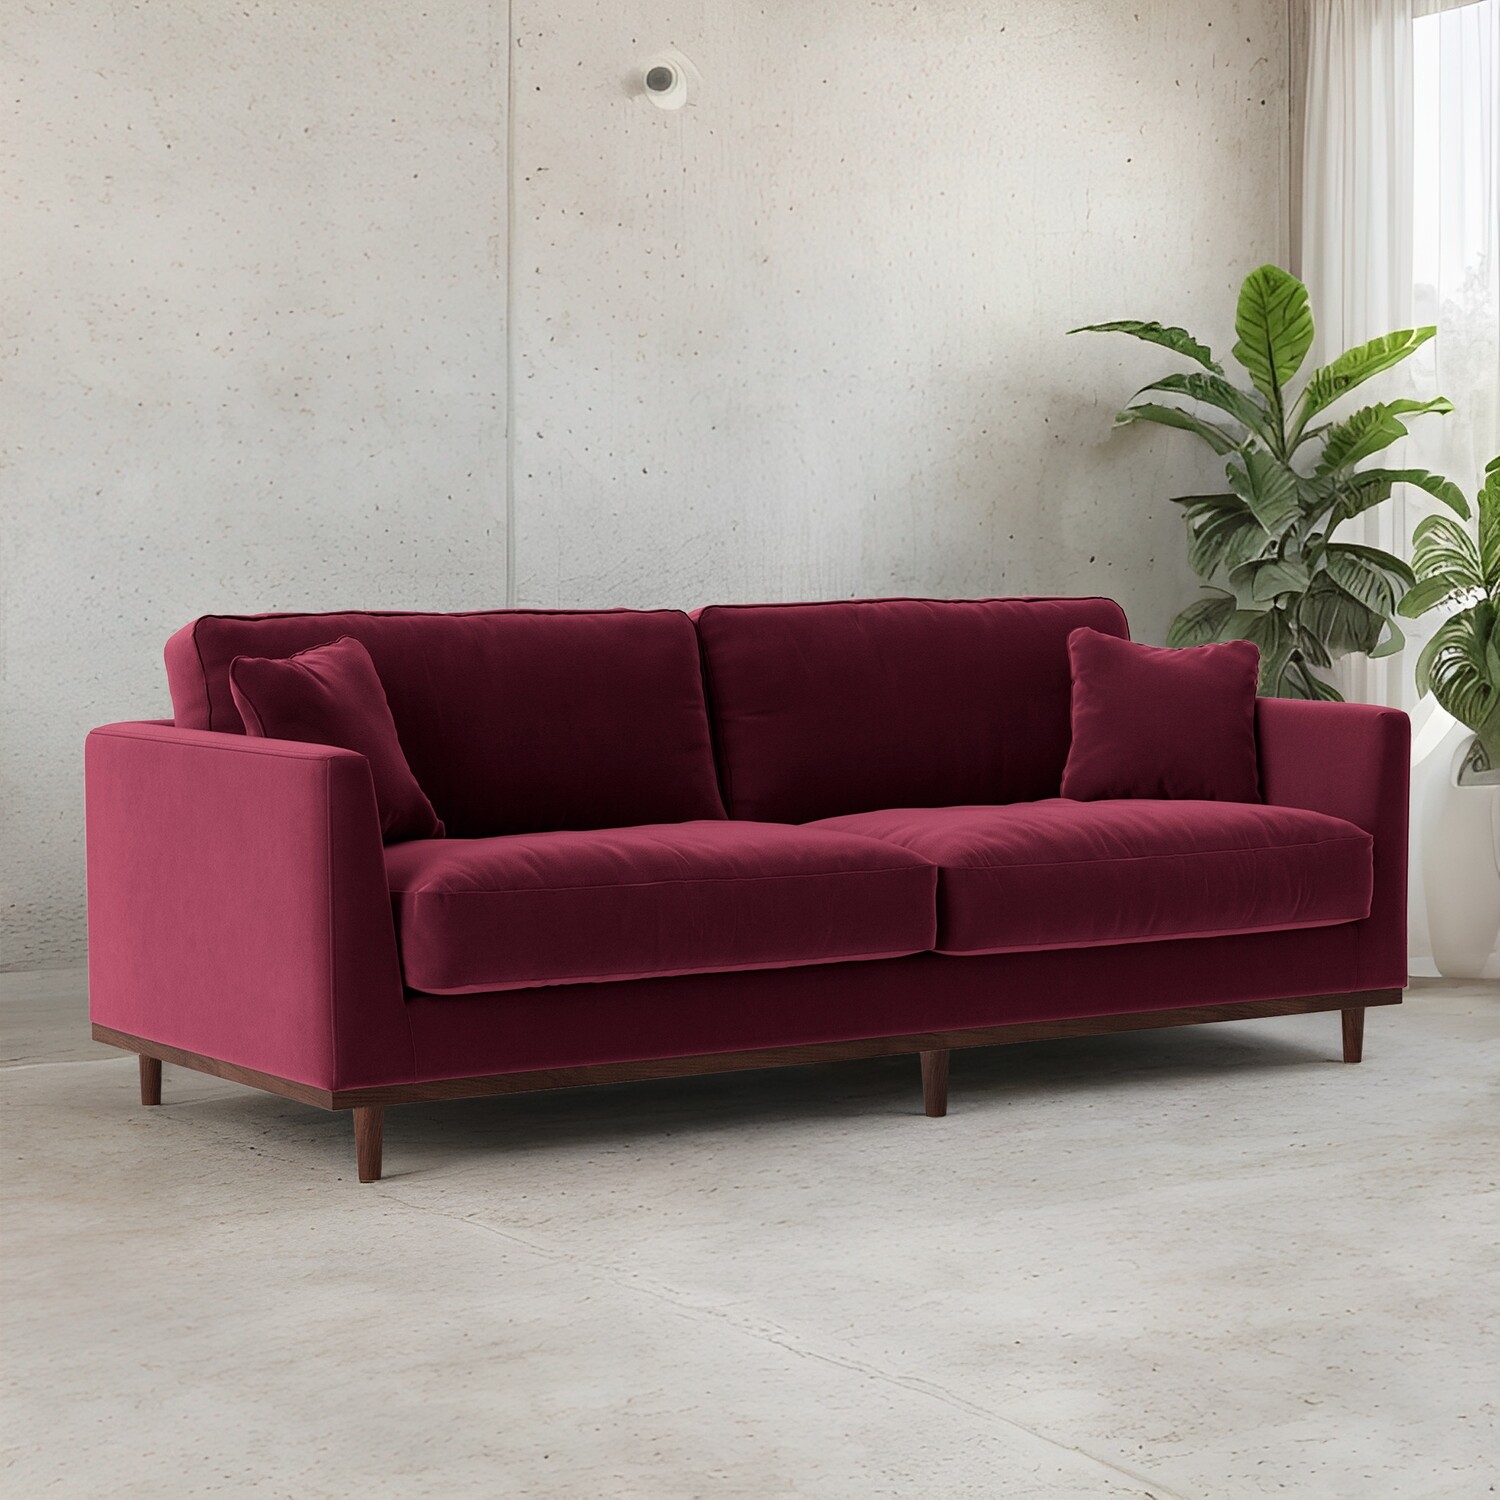 Nord 3 Seater Sofa - 80"